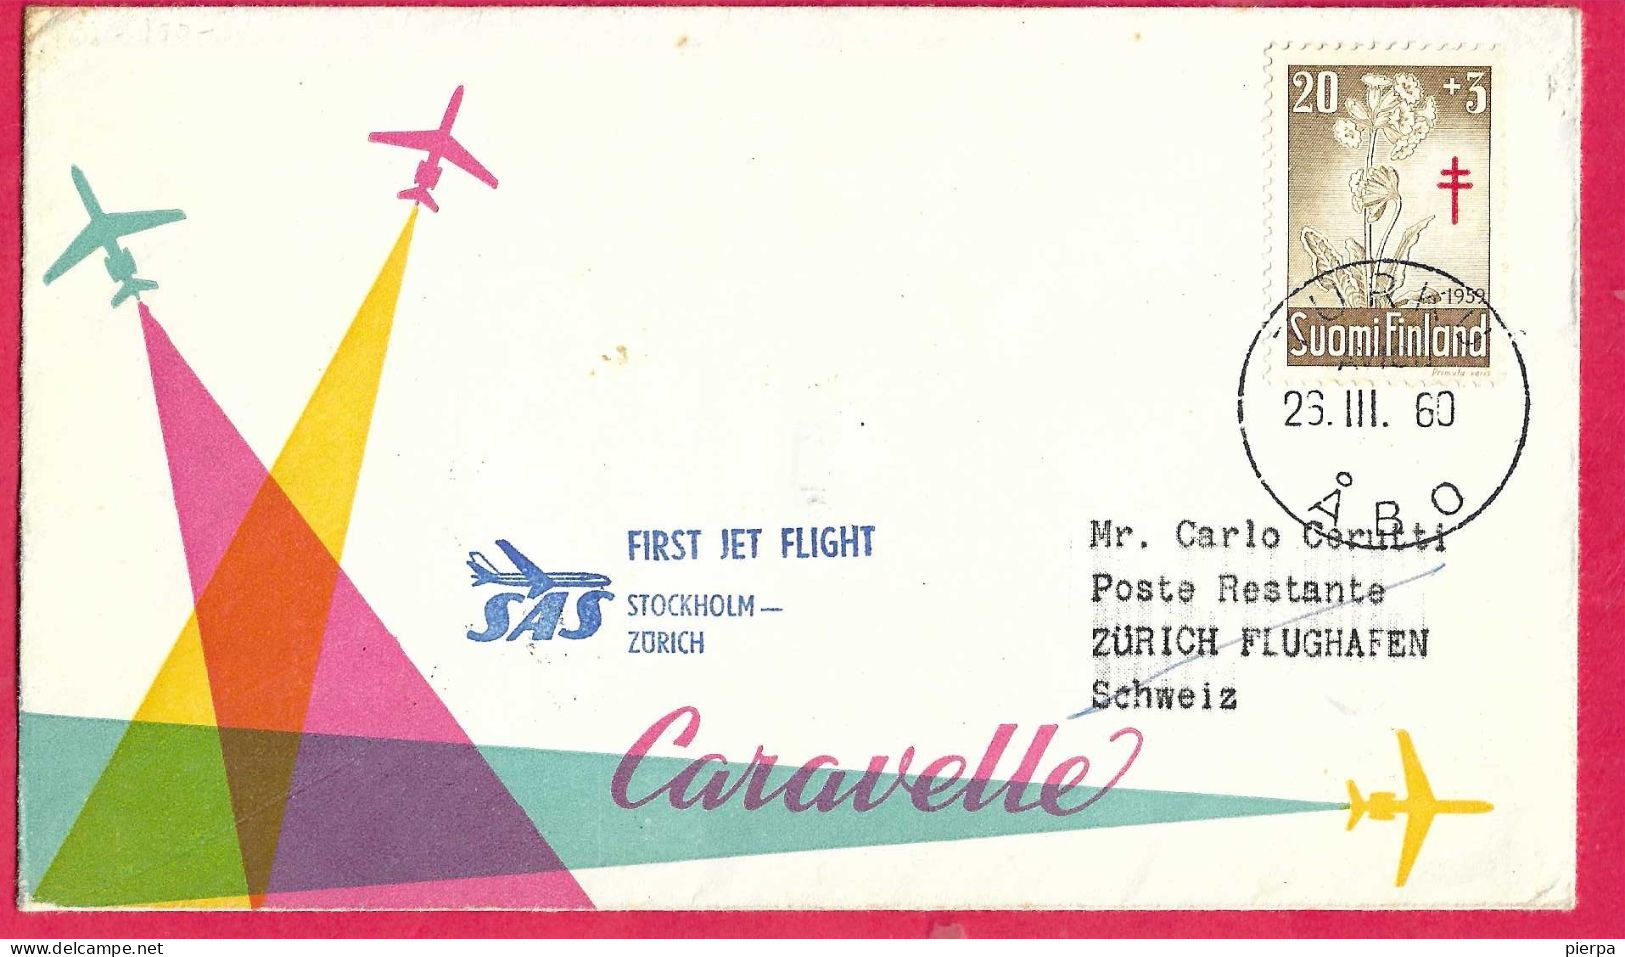 SVERIGE - FIRST FLIGHT SAS WITH CARAVELLE FROM STOCKHOLM TO ZURICH *29.3.60* ON OFFICIAL COVER FROM FINLAND - Covers & Documents